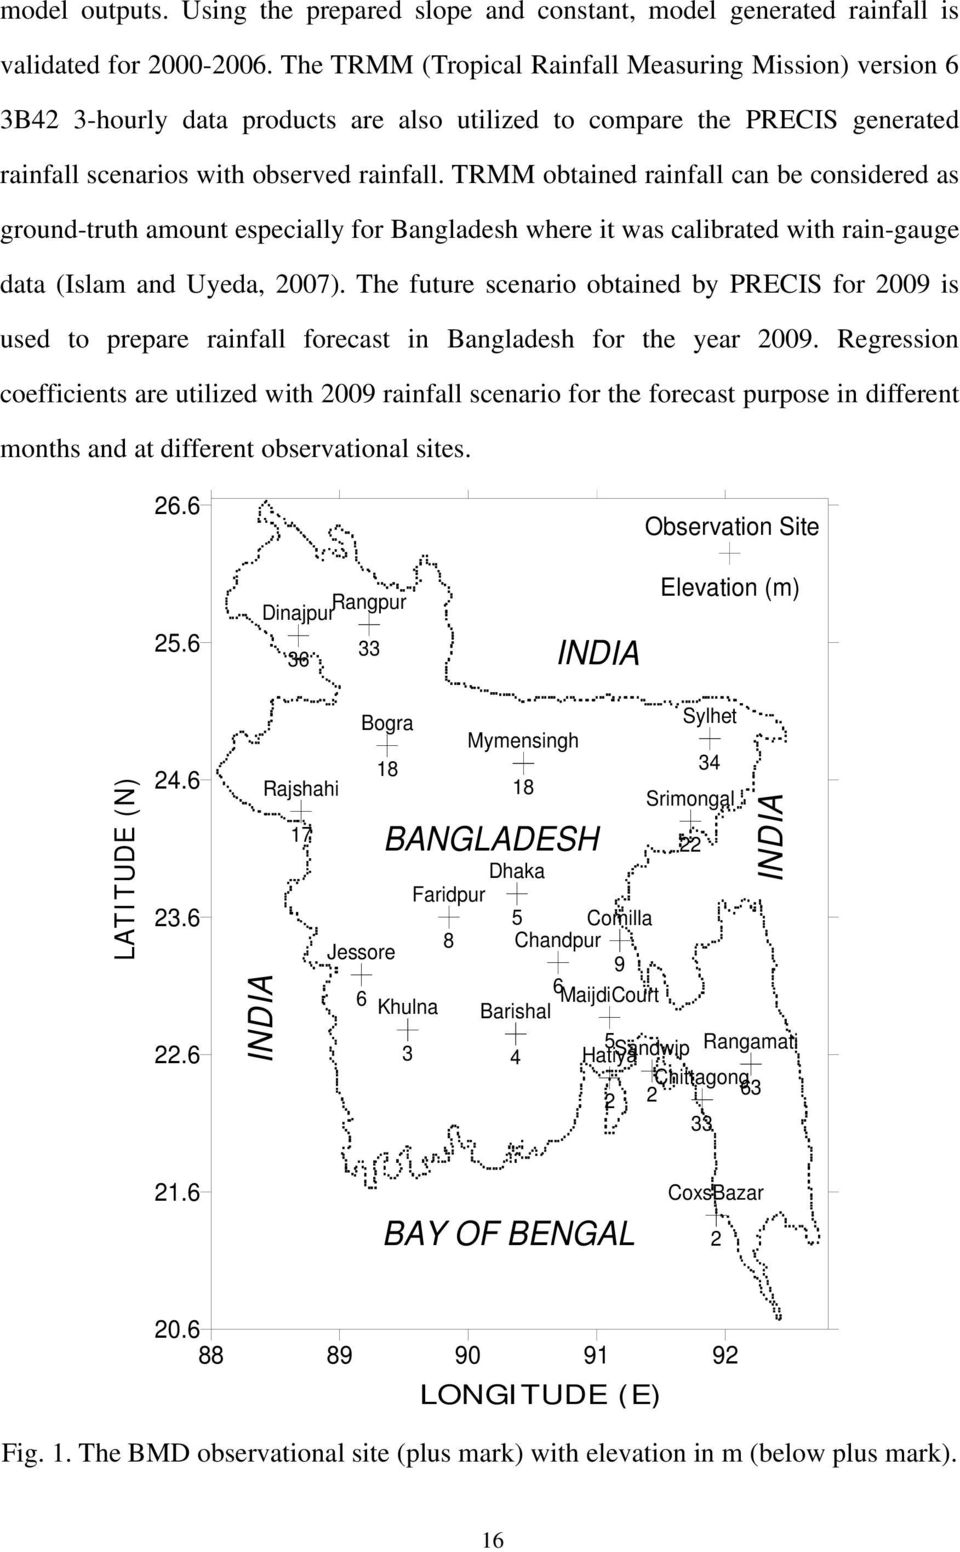 TRMM obtained rainfall can be considered as ground-truth amount especially for Bangladesh where it was calibrated with rain-gauge data (Islam and Uyeda, 2007).